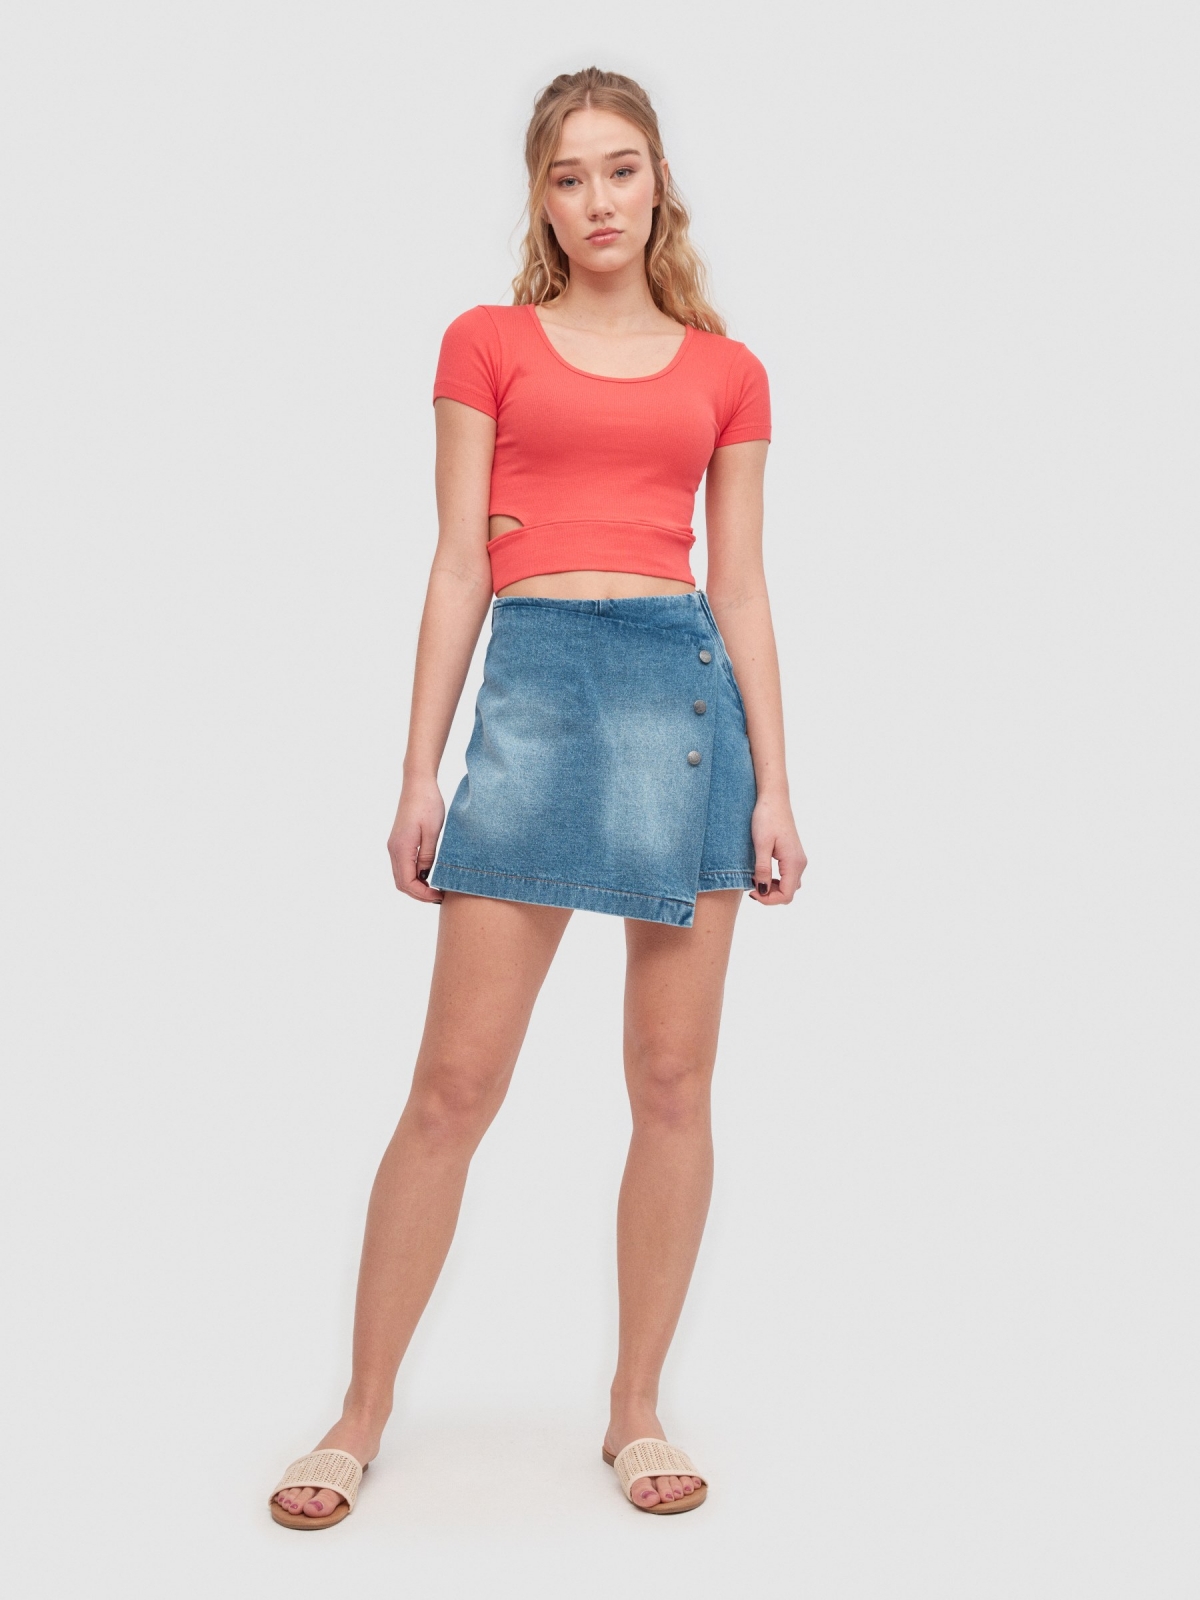 Cut out crop top red front view